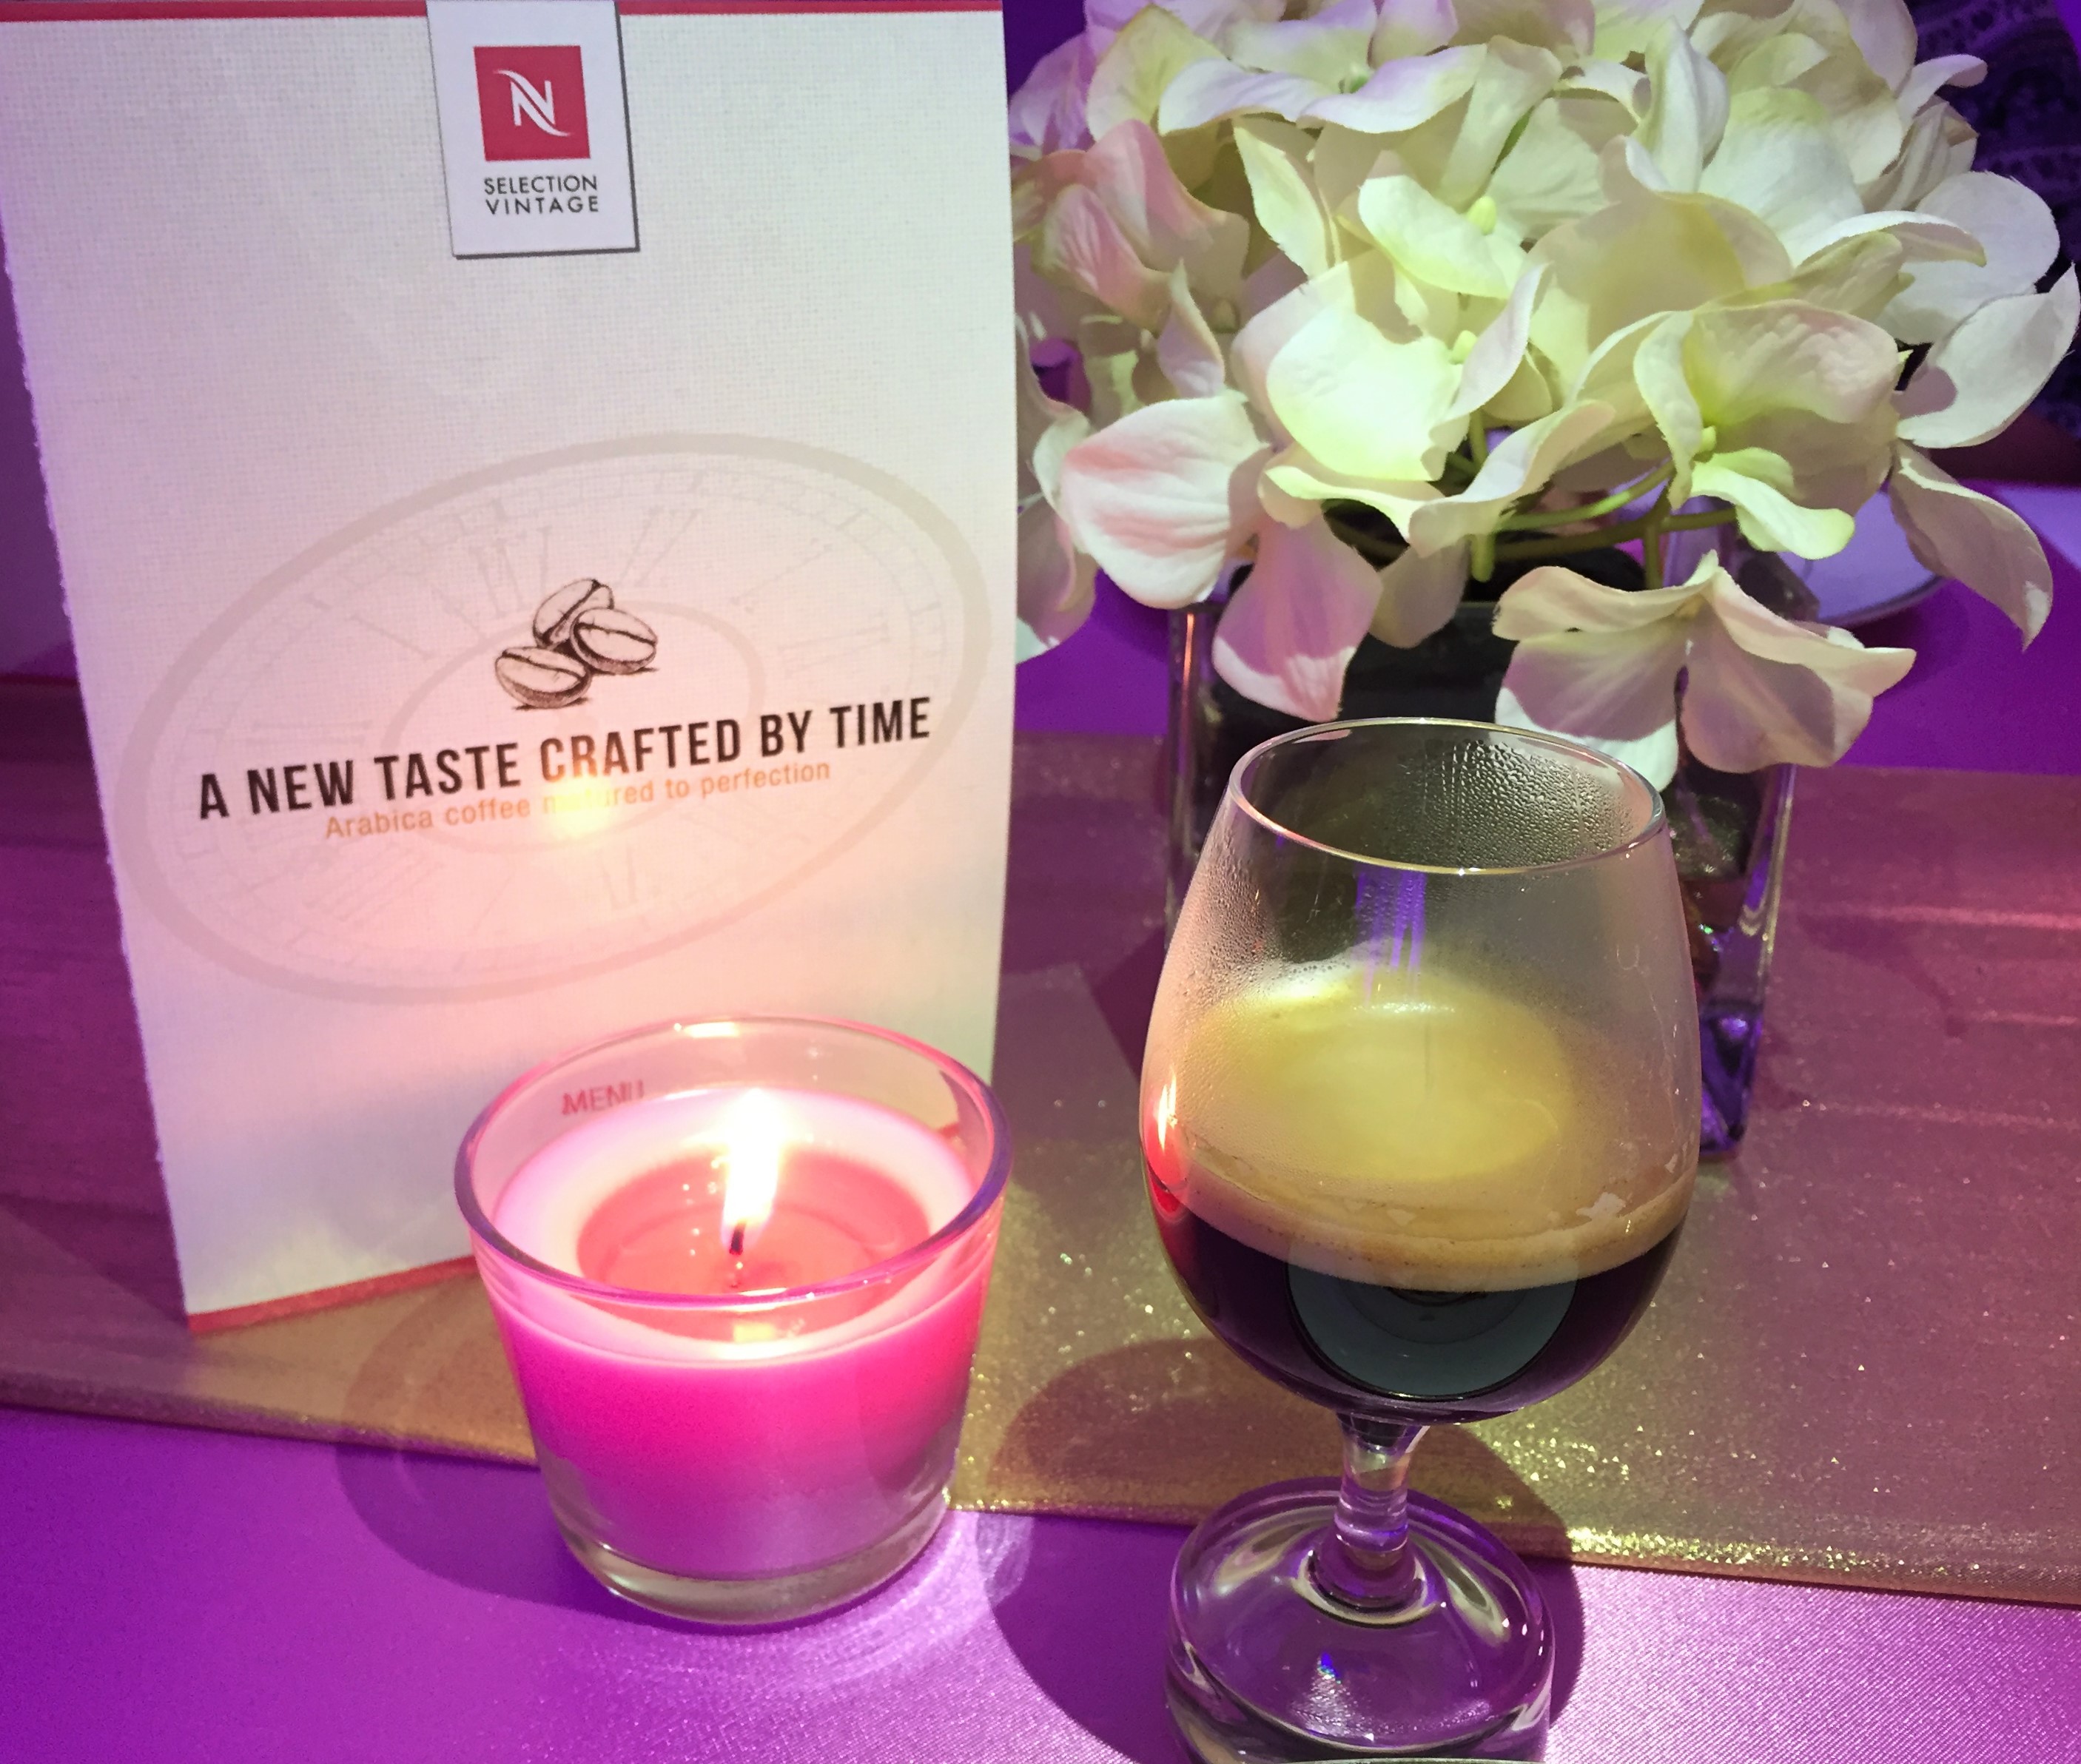 Nespresso Limited Edition SELECTION VINTAGE 2014 Launch - Pamper.my